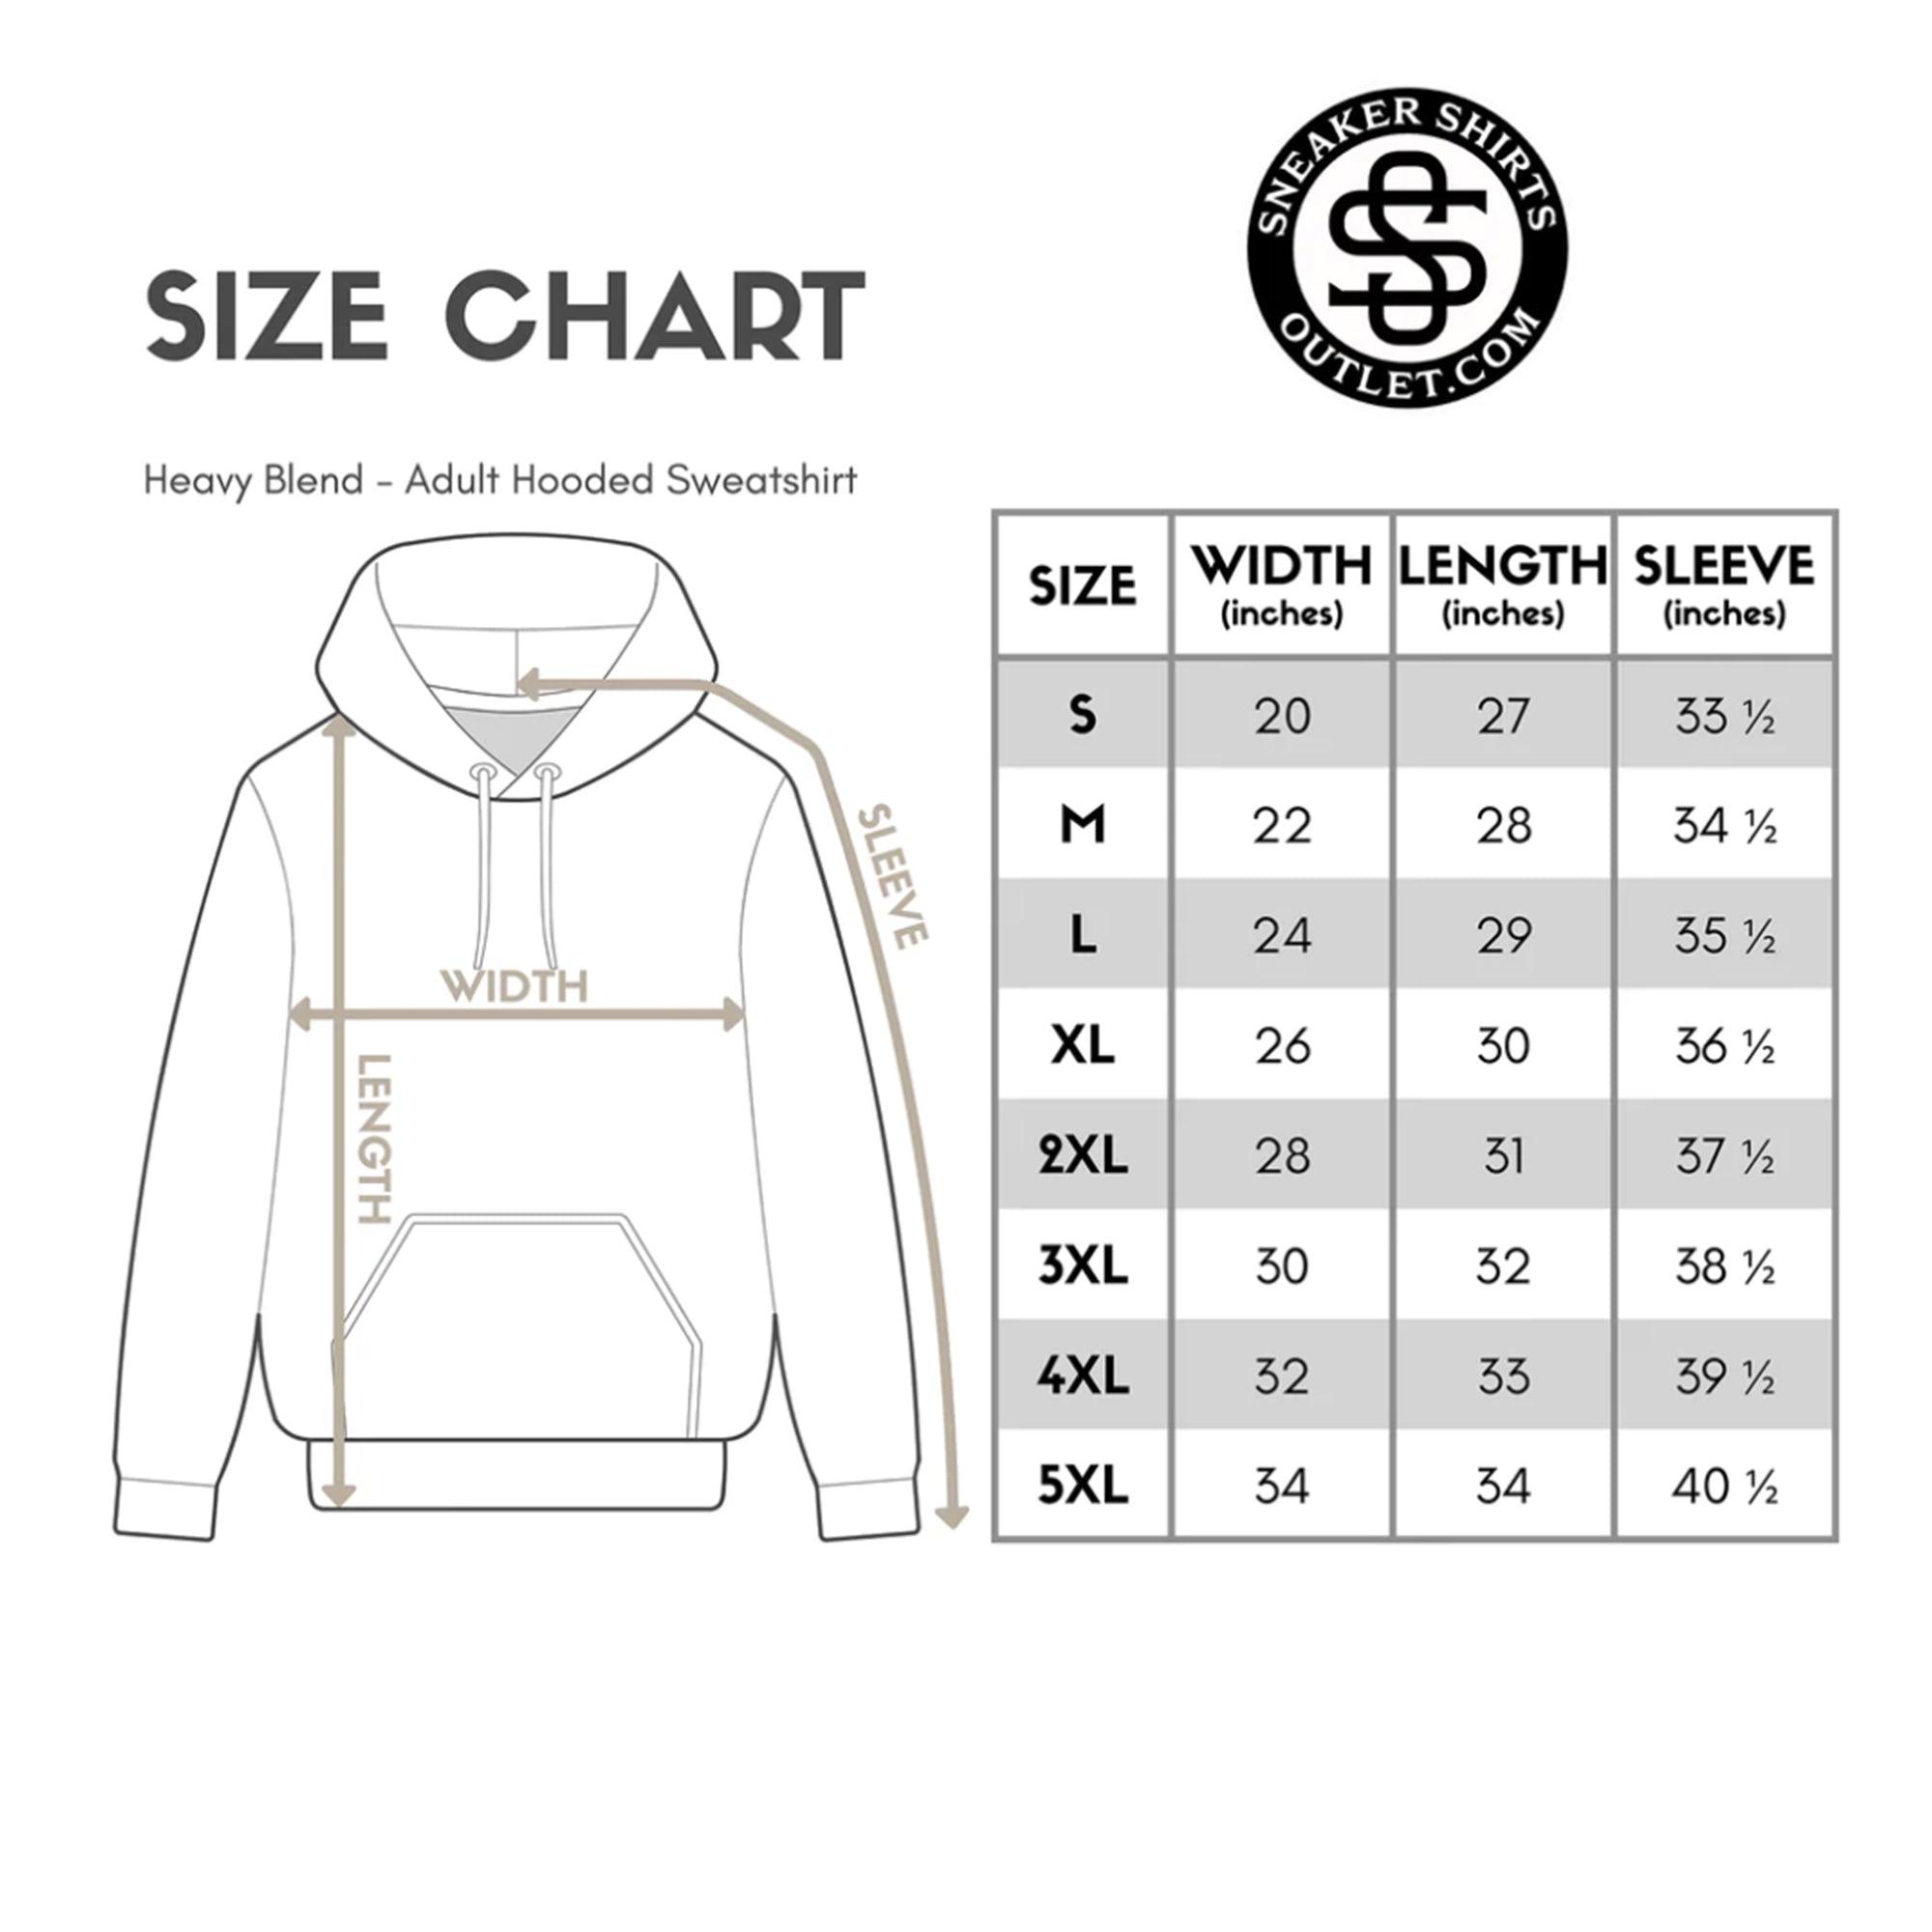 size chart Hustle Hoodie Yeezy Boost 700s Bright Blue photo